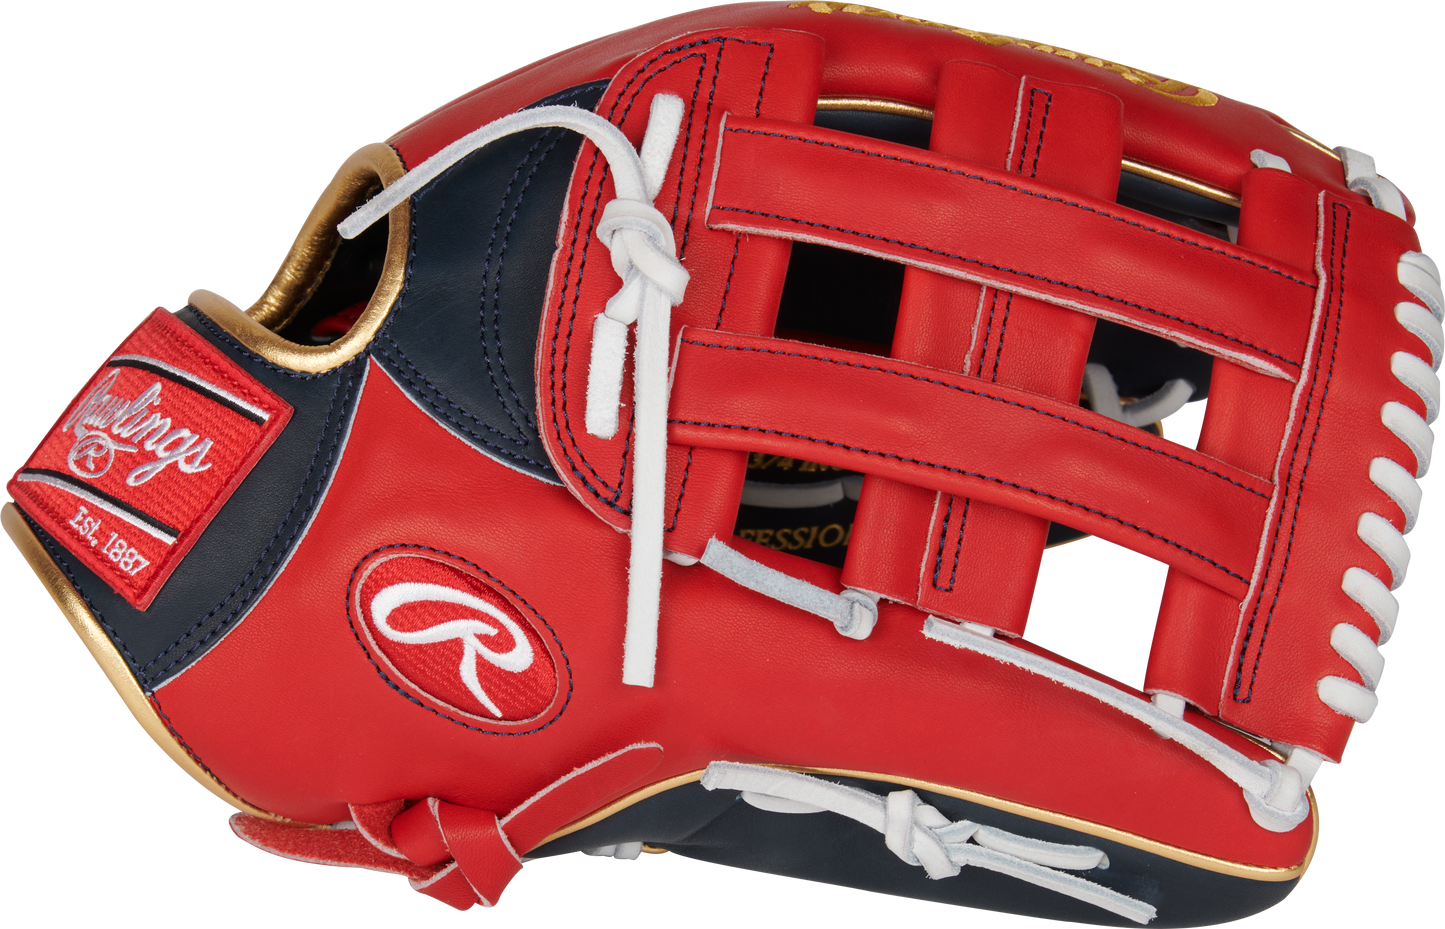 2022 RONALD ACUÑA JR. PRO PREFERRED OUTFIELD GLOVE - (SEE PRODUCT DESCRIPTIONS FOR DELIVERY DETAILS) Bat Club USA